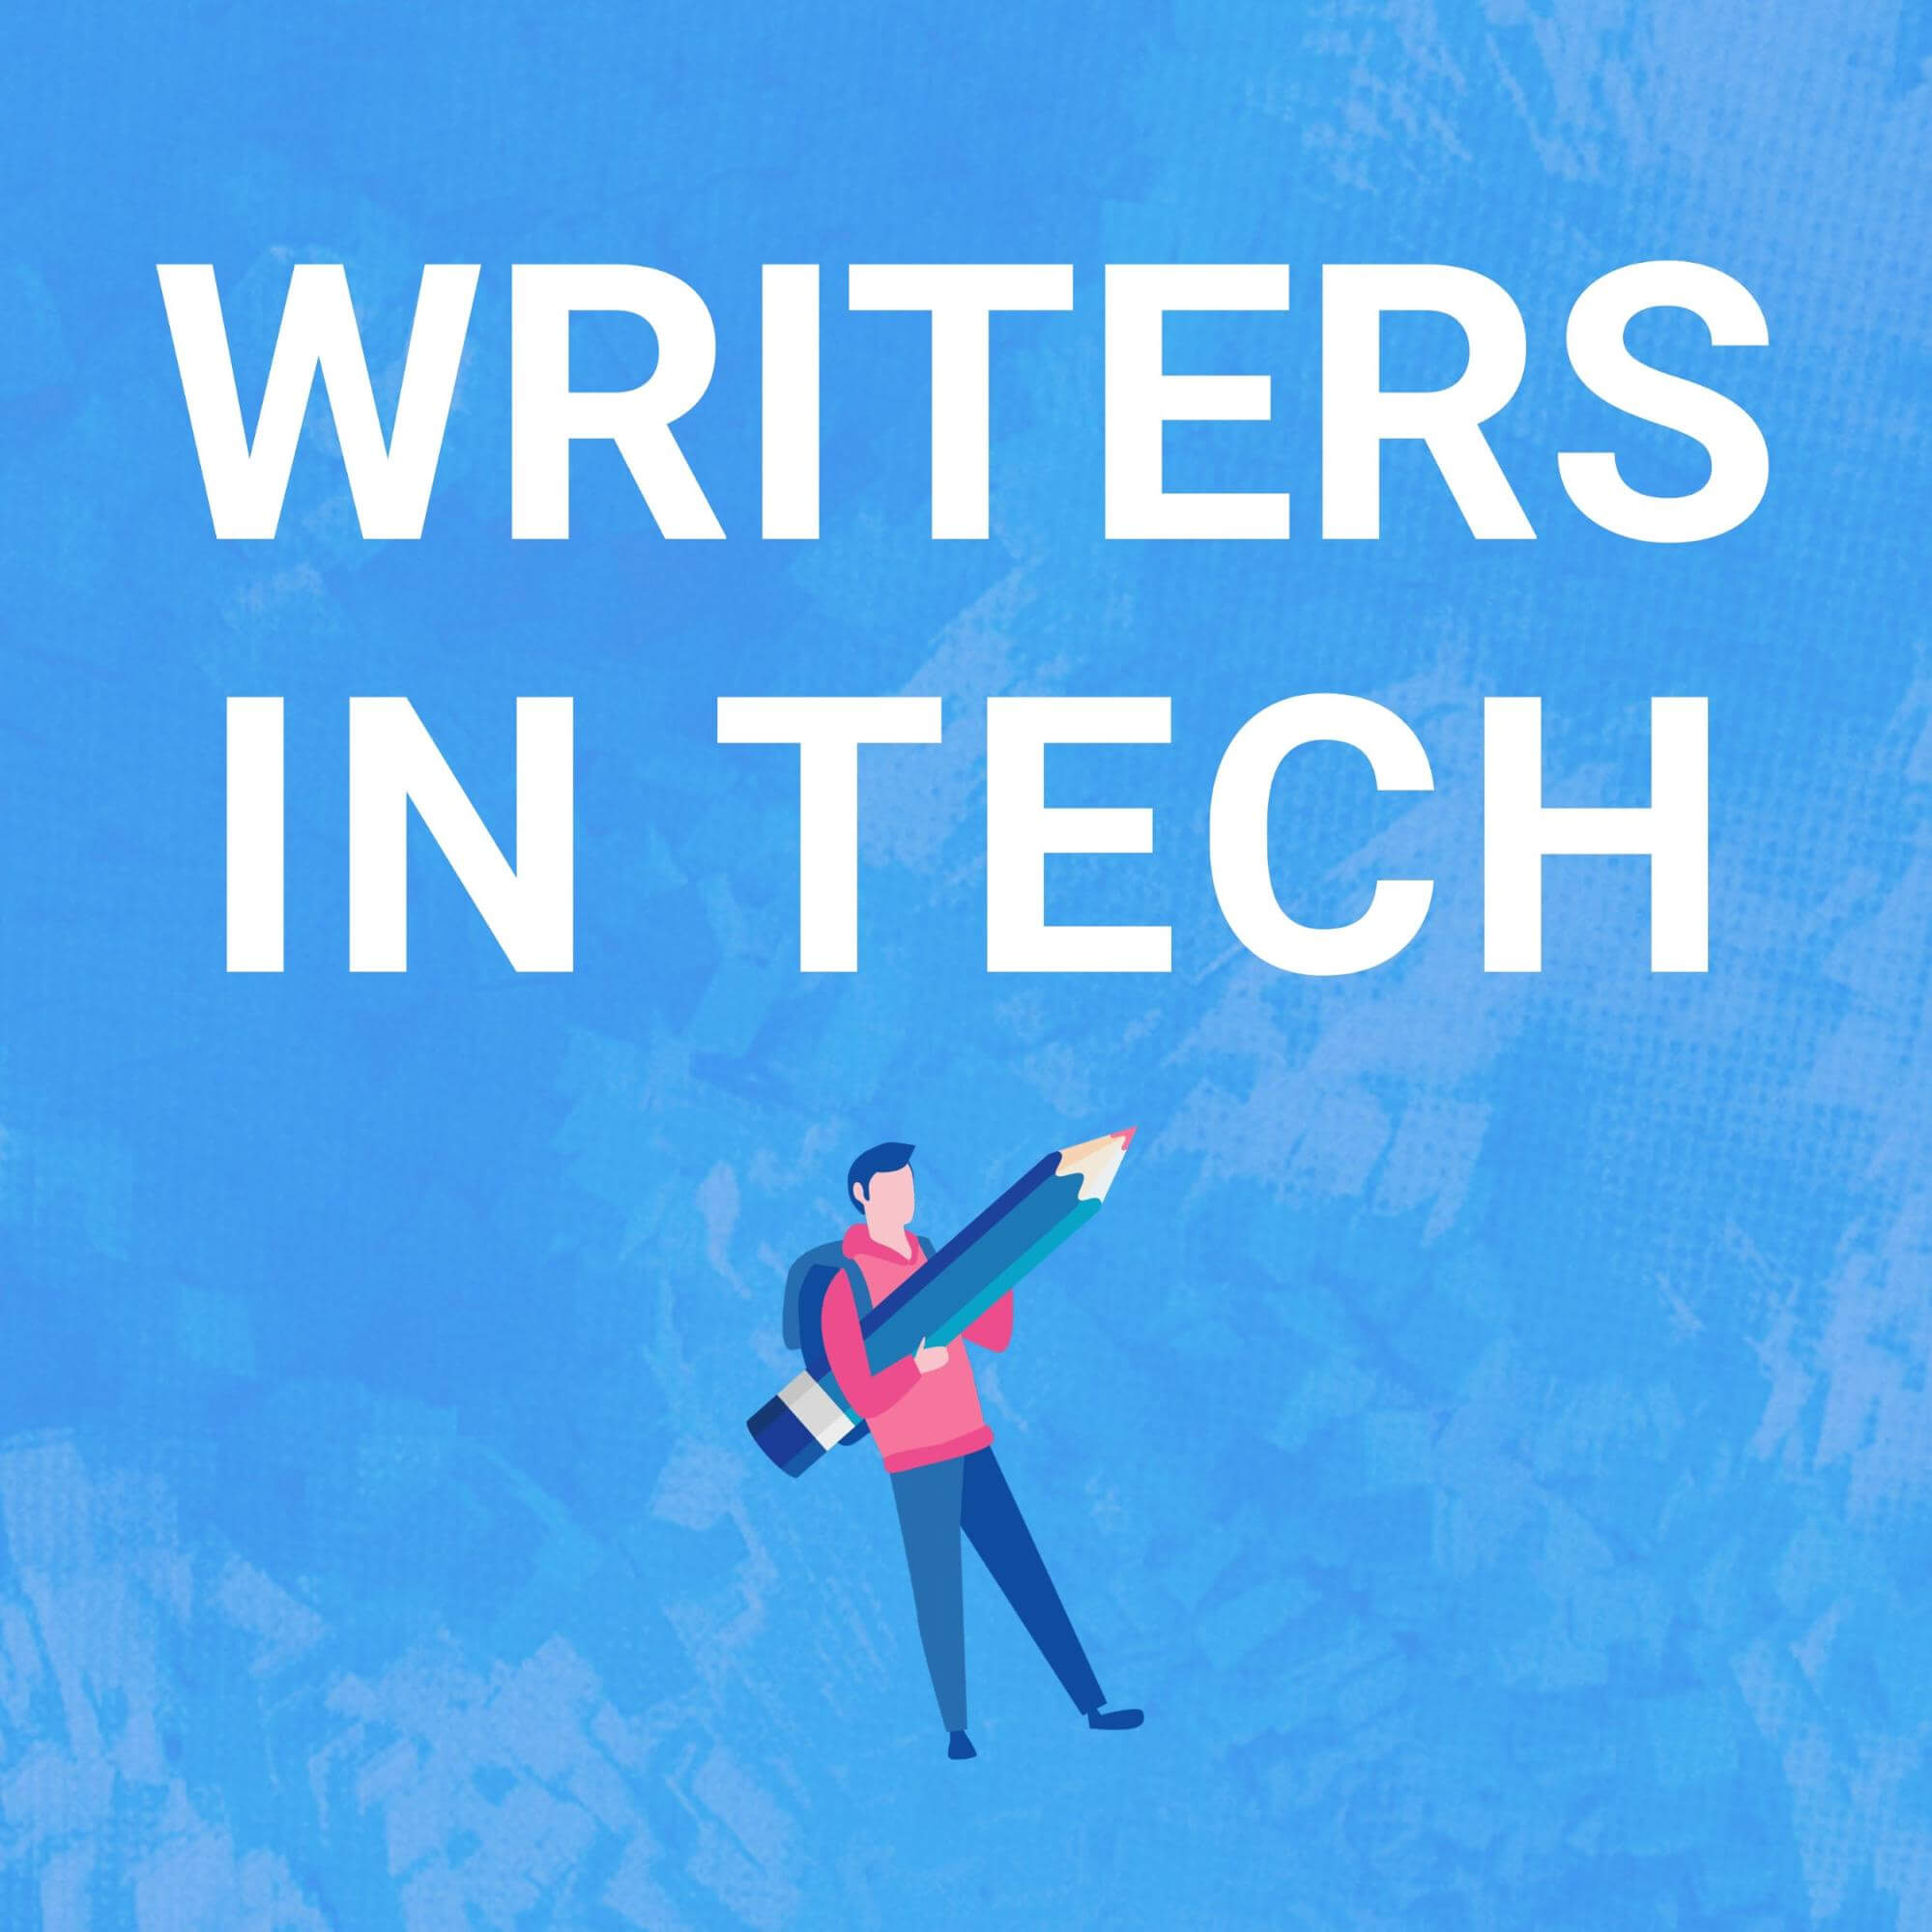 This ux writing podcast will help you determine if you it's the right career path for you